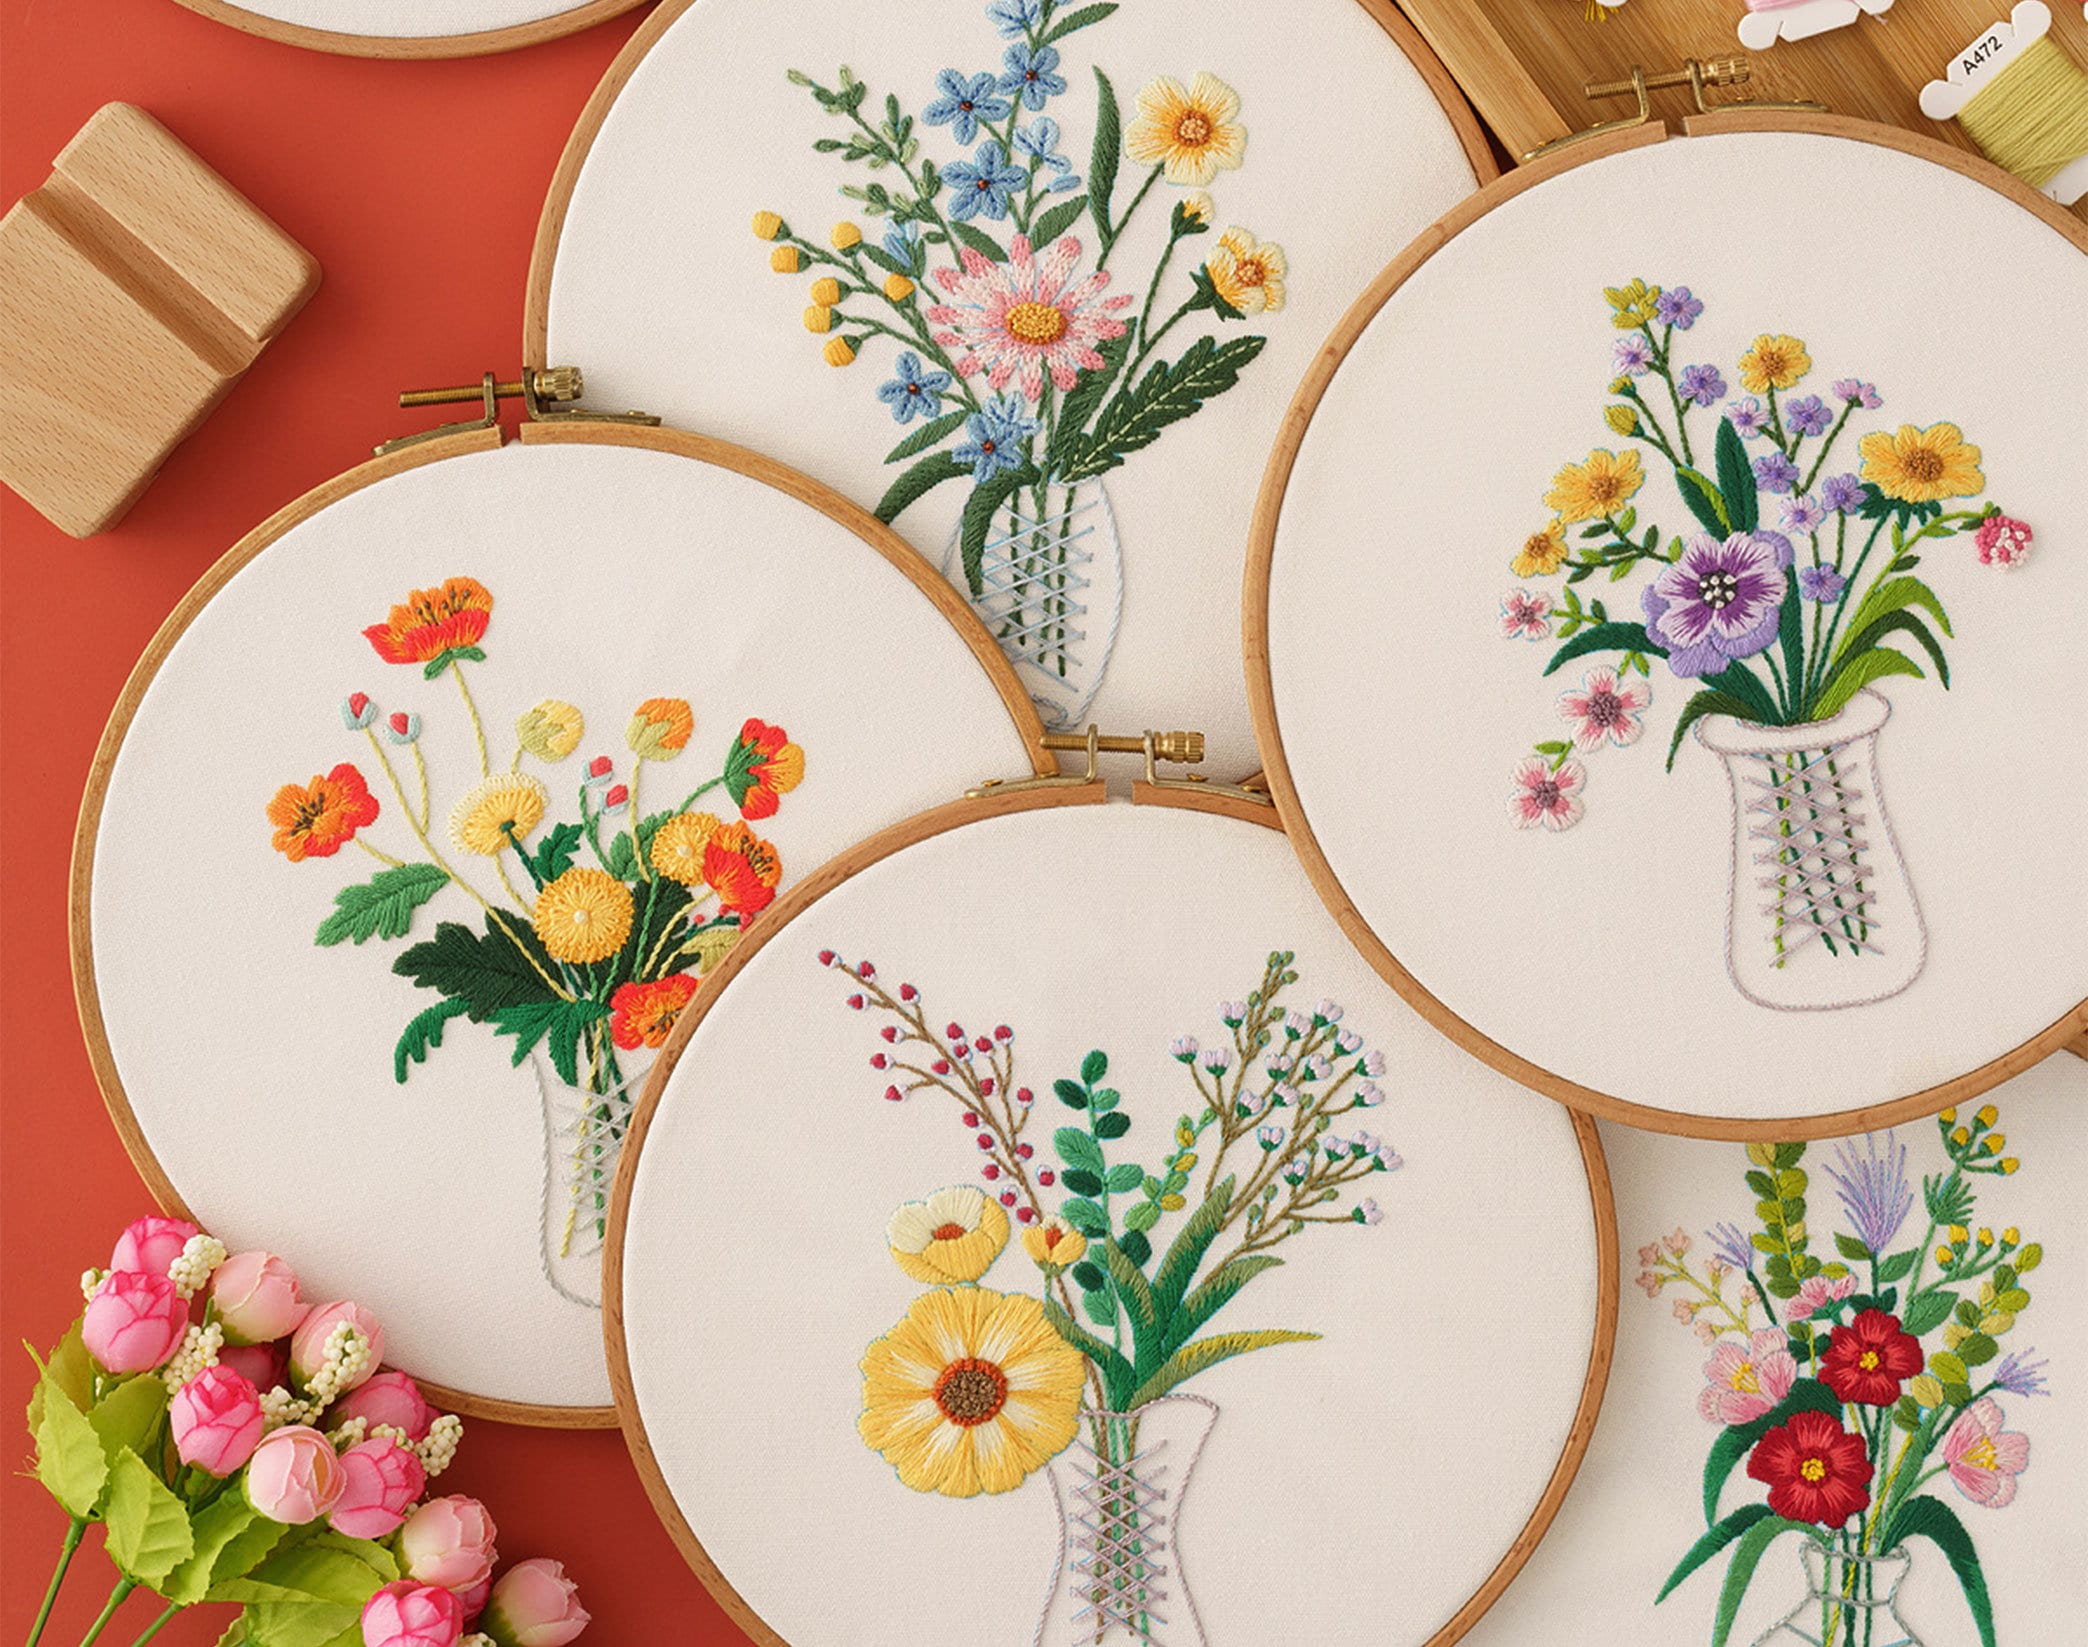 Custom Country Kit National Flower Embroidery Kit Beginner - Embroidery  Hoop Art - DIY Craft Kit - Travel Embroidery — Handstitched Studio